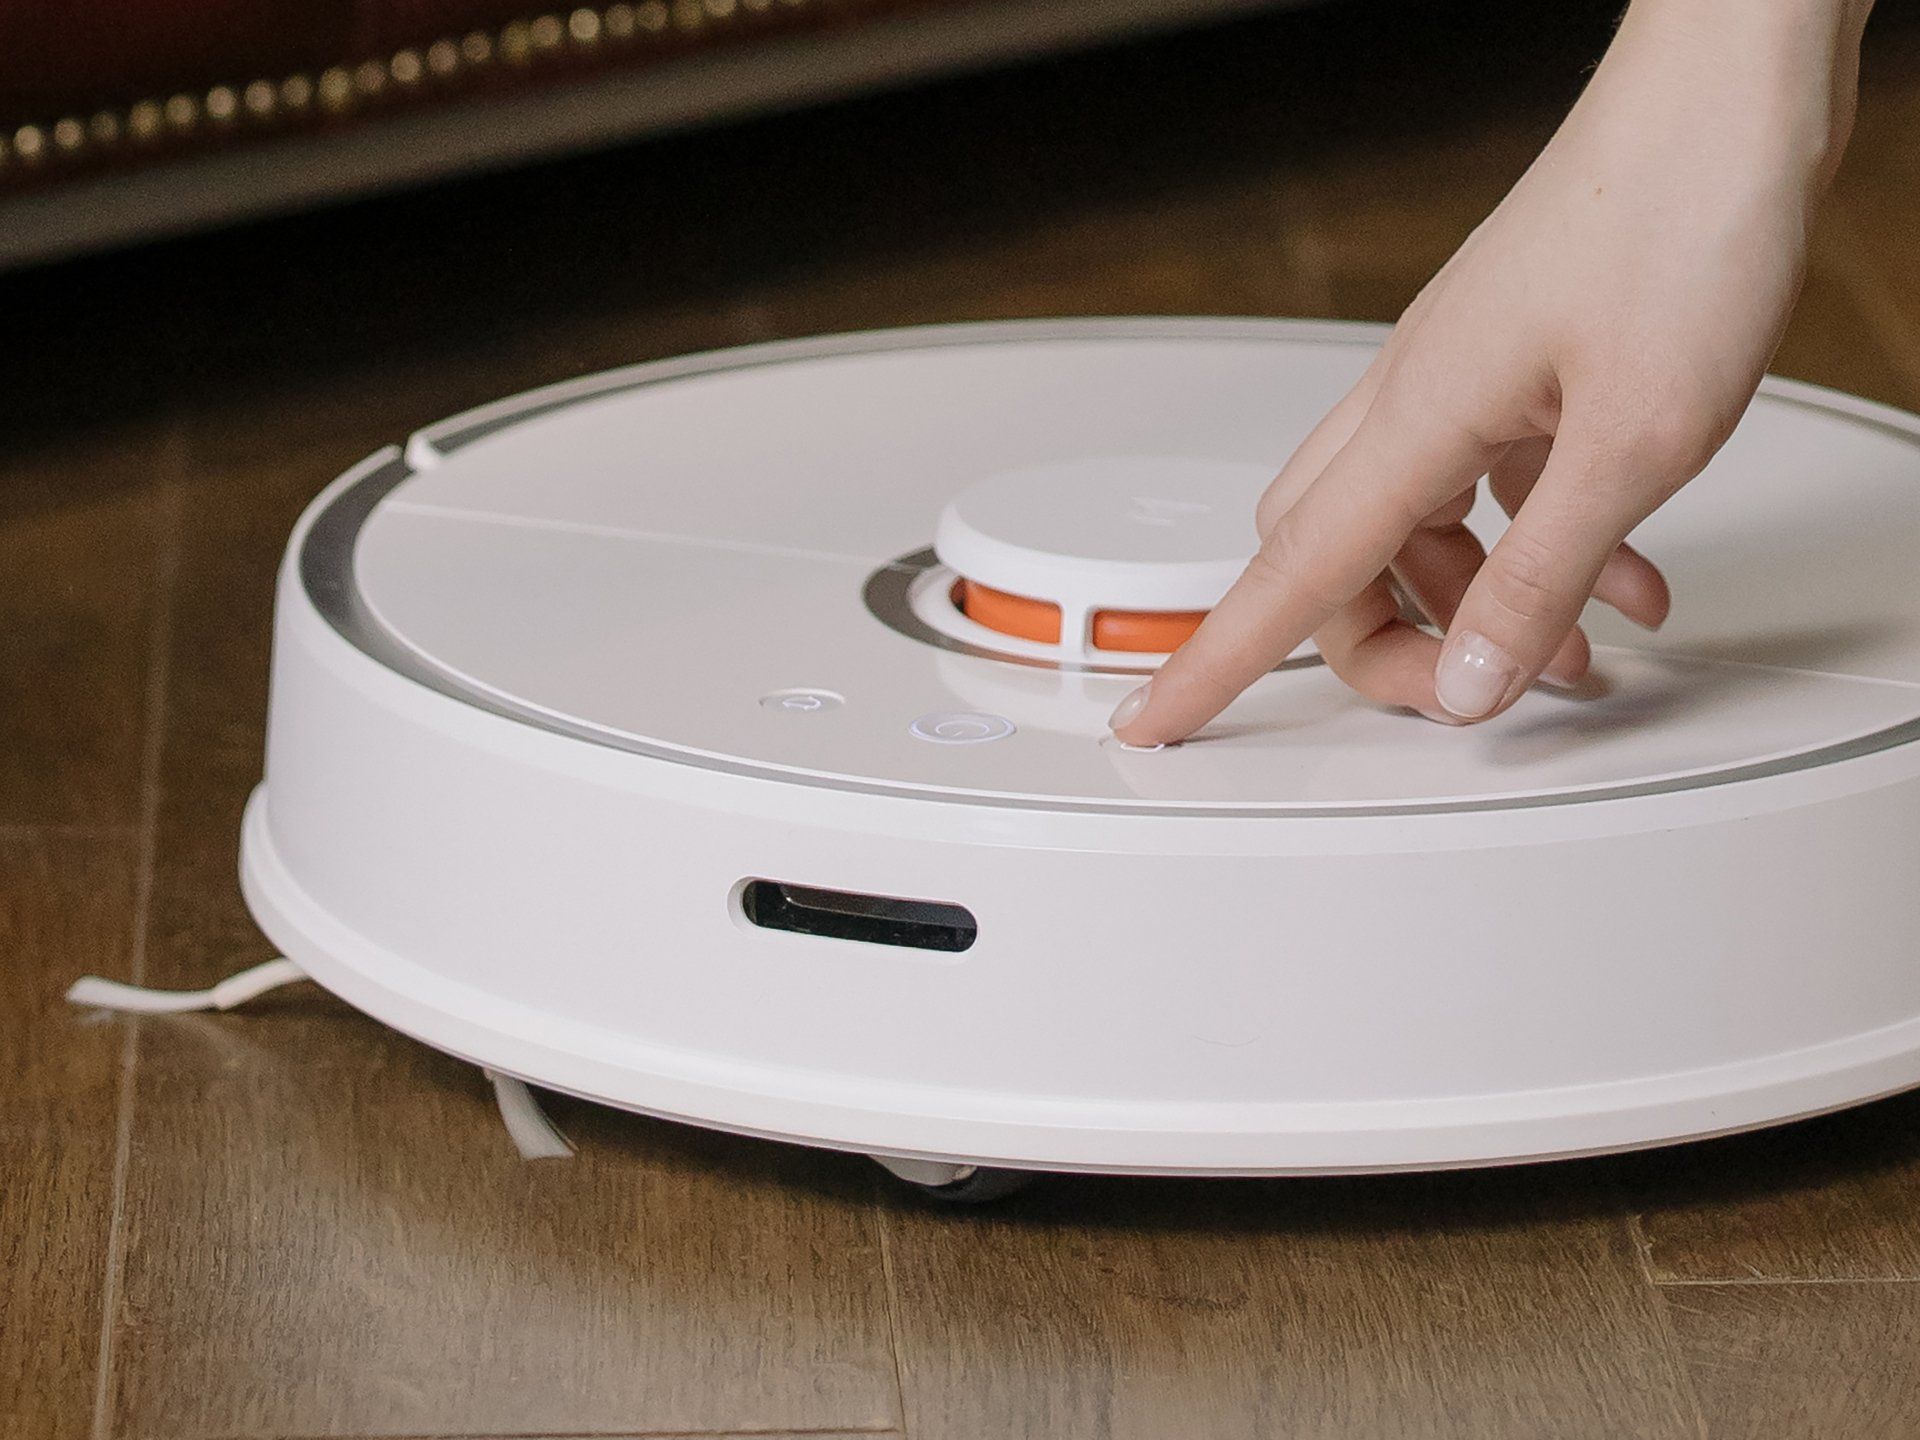 a robotic vacuum cleaner being operated